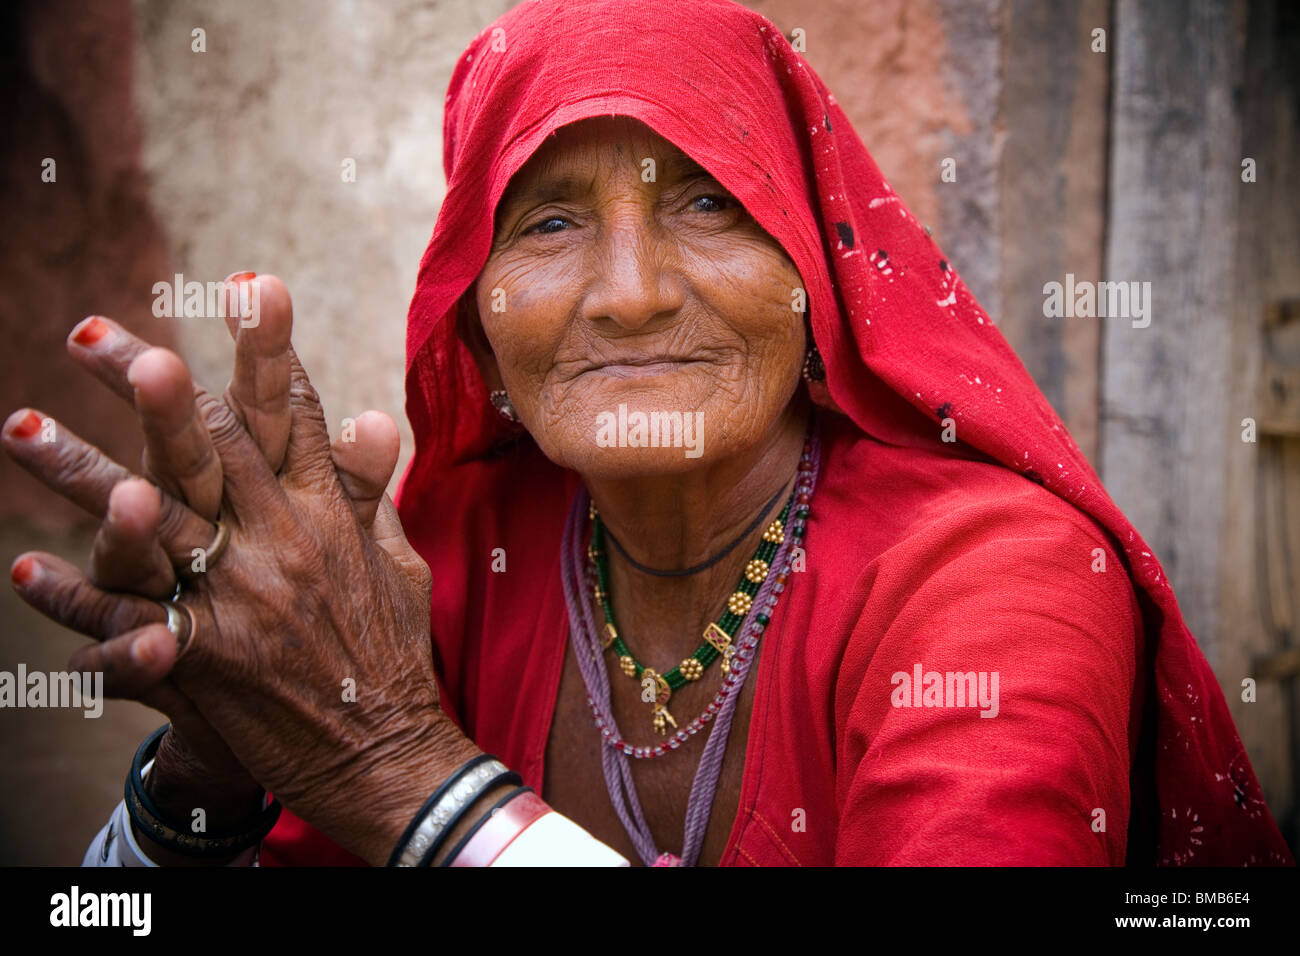 India, Rajasthan, portrait of old village woman Stock Photo